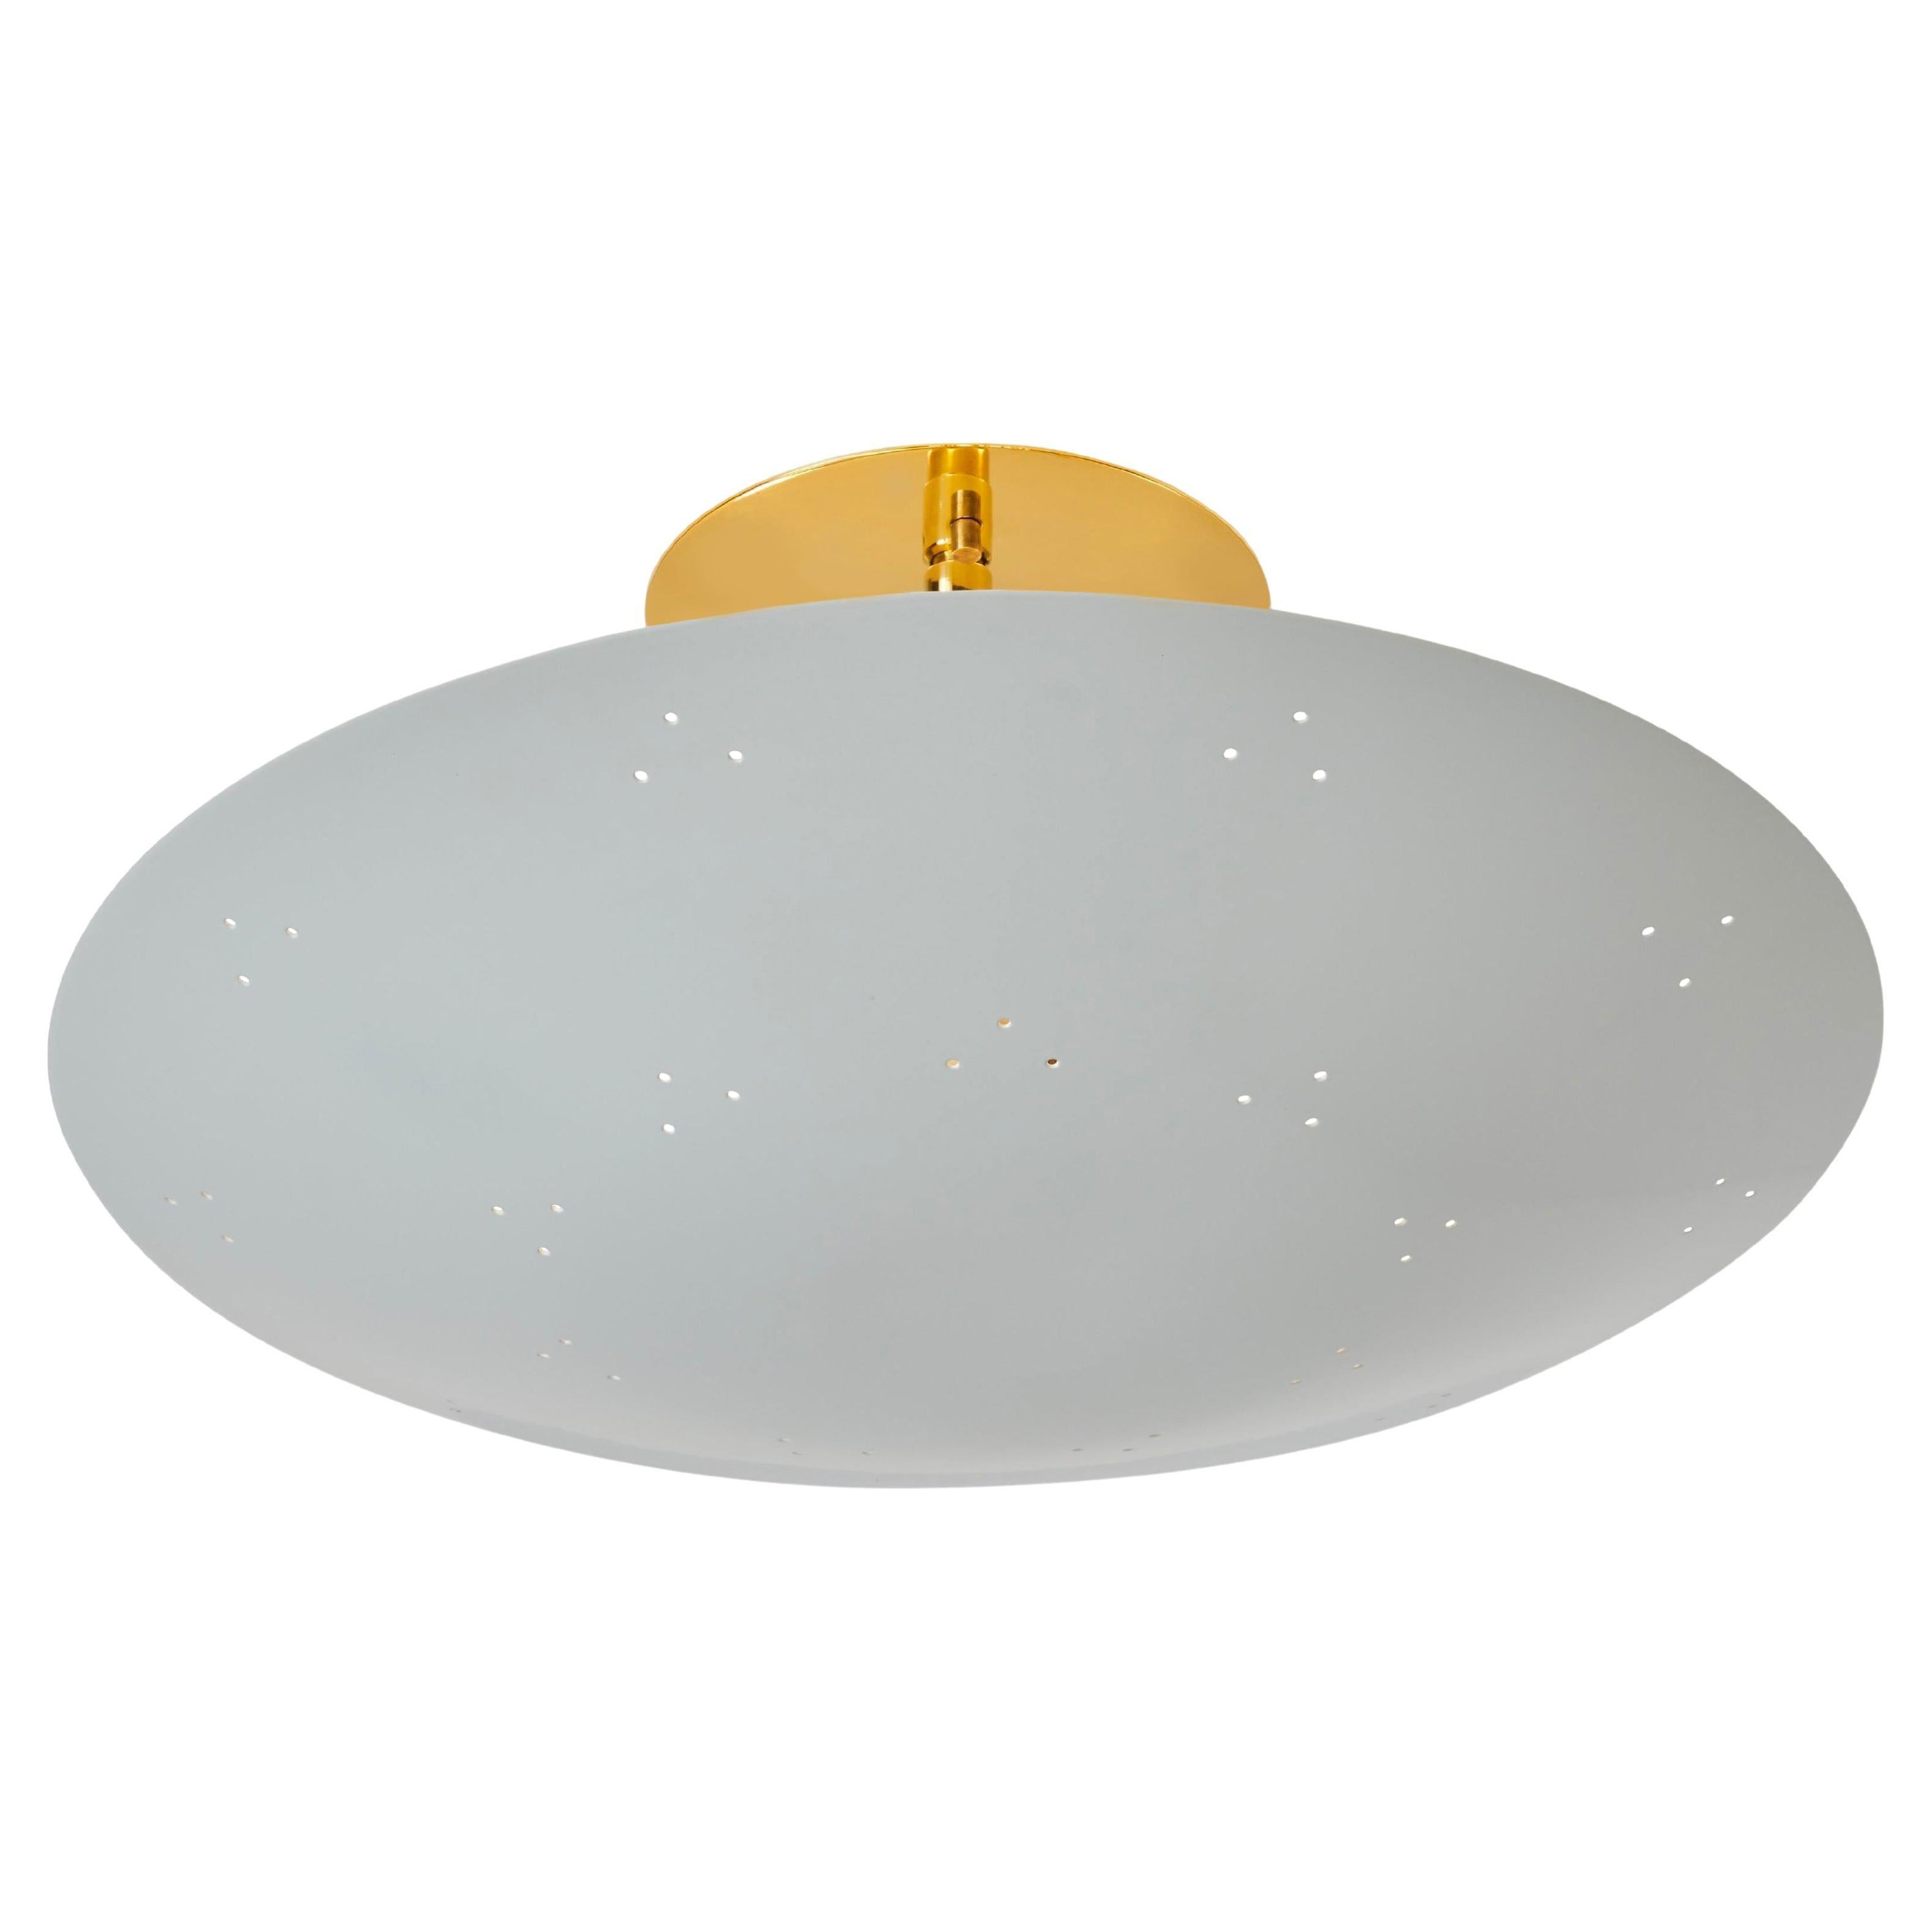 Two Enlighten 'Rey' Perforated Metal Dome Ceiling Lamp in White